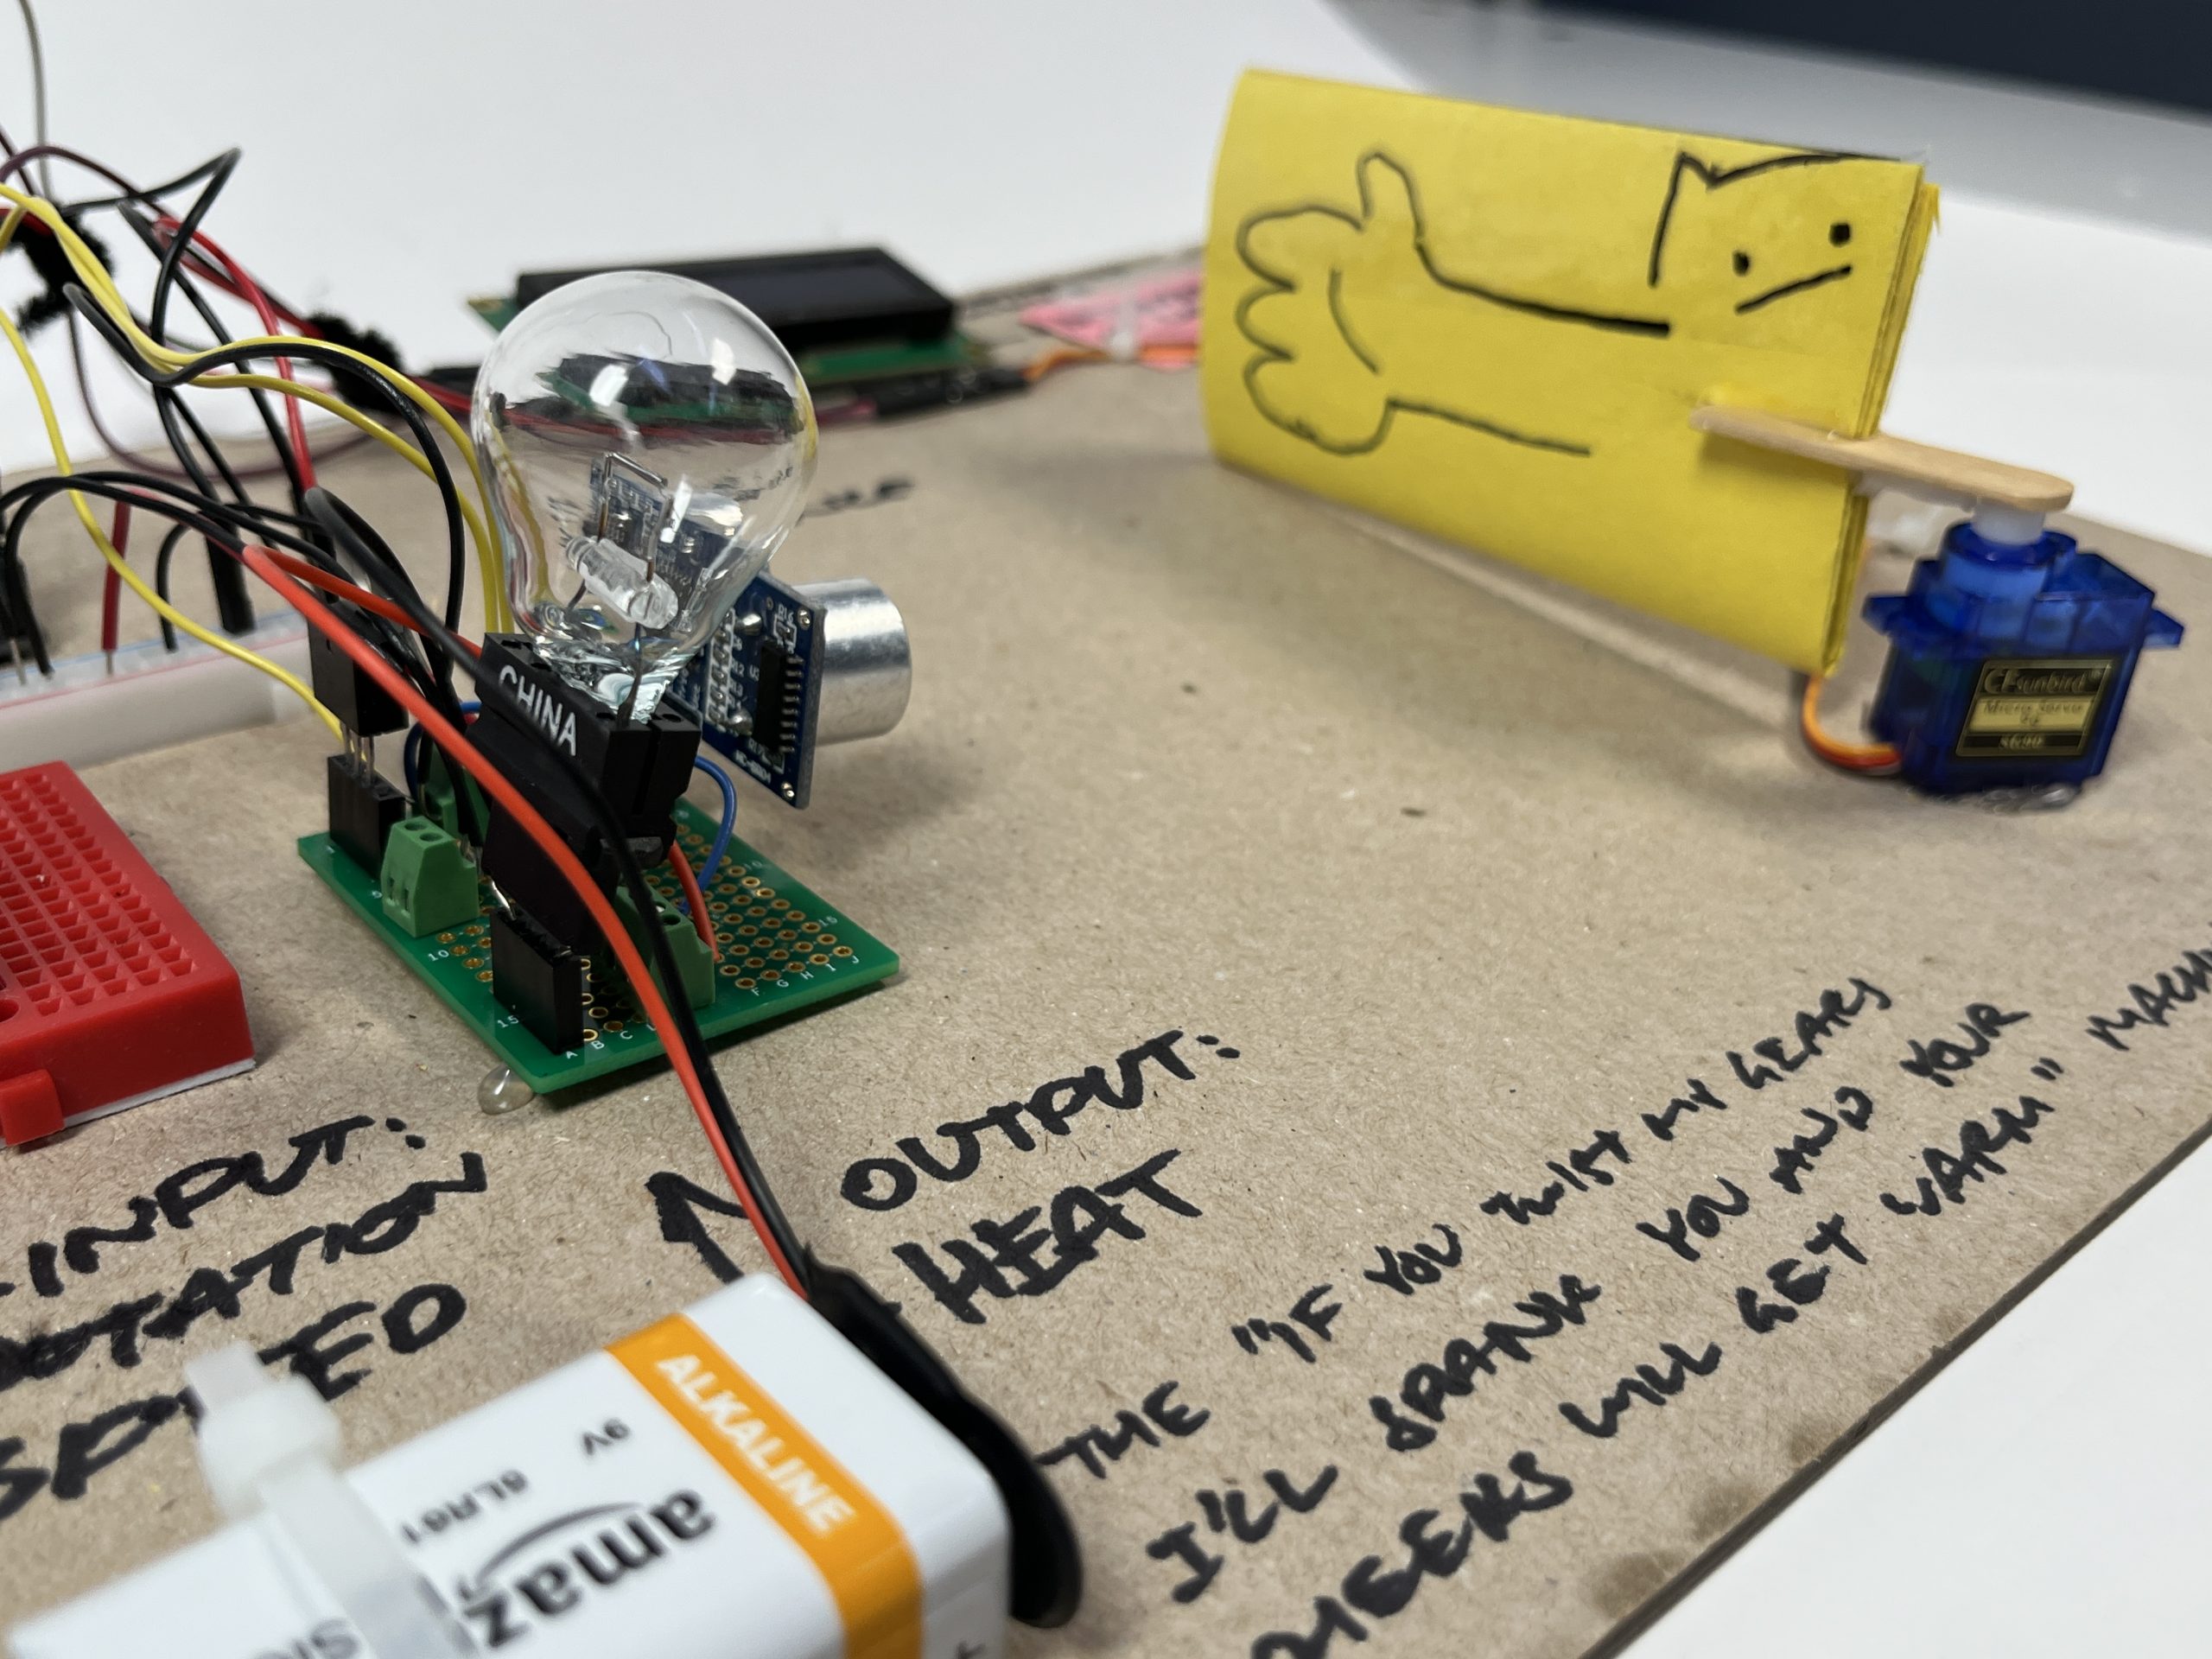 A closeup shot of the transducer, with emphasis on the yellow paper arm that is attached to the servo motor. It has a big cartoonish hand drawn on it with a cat in the background.